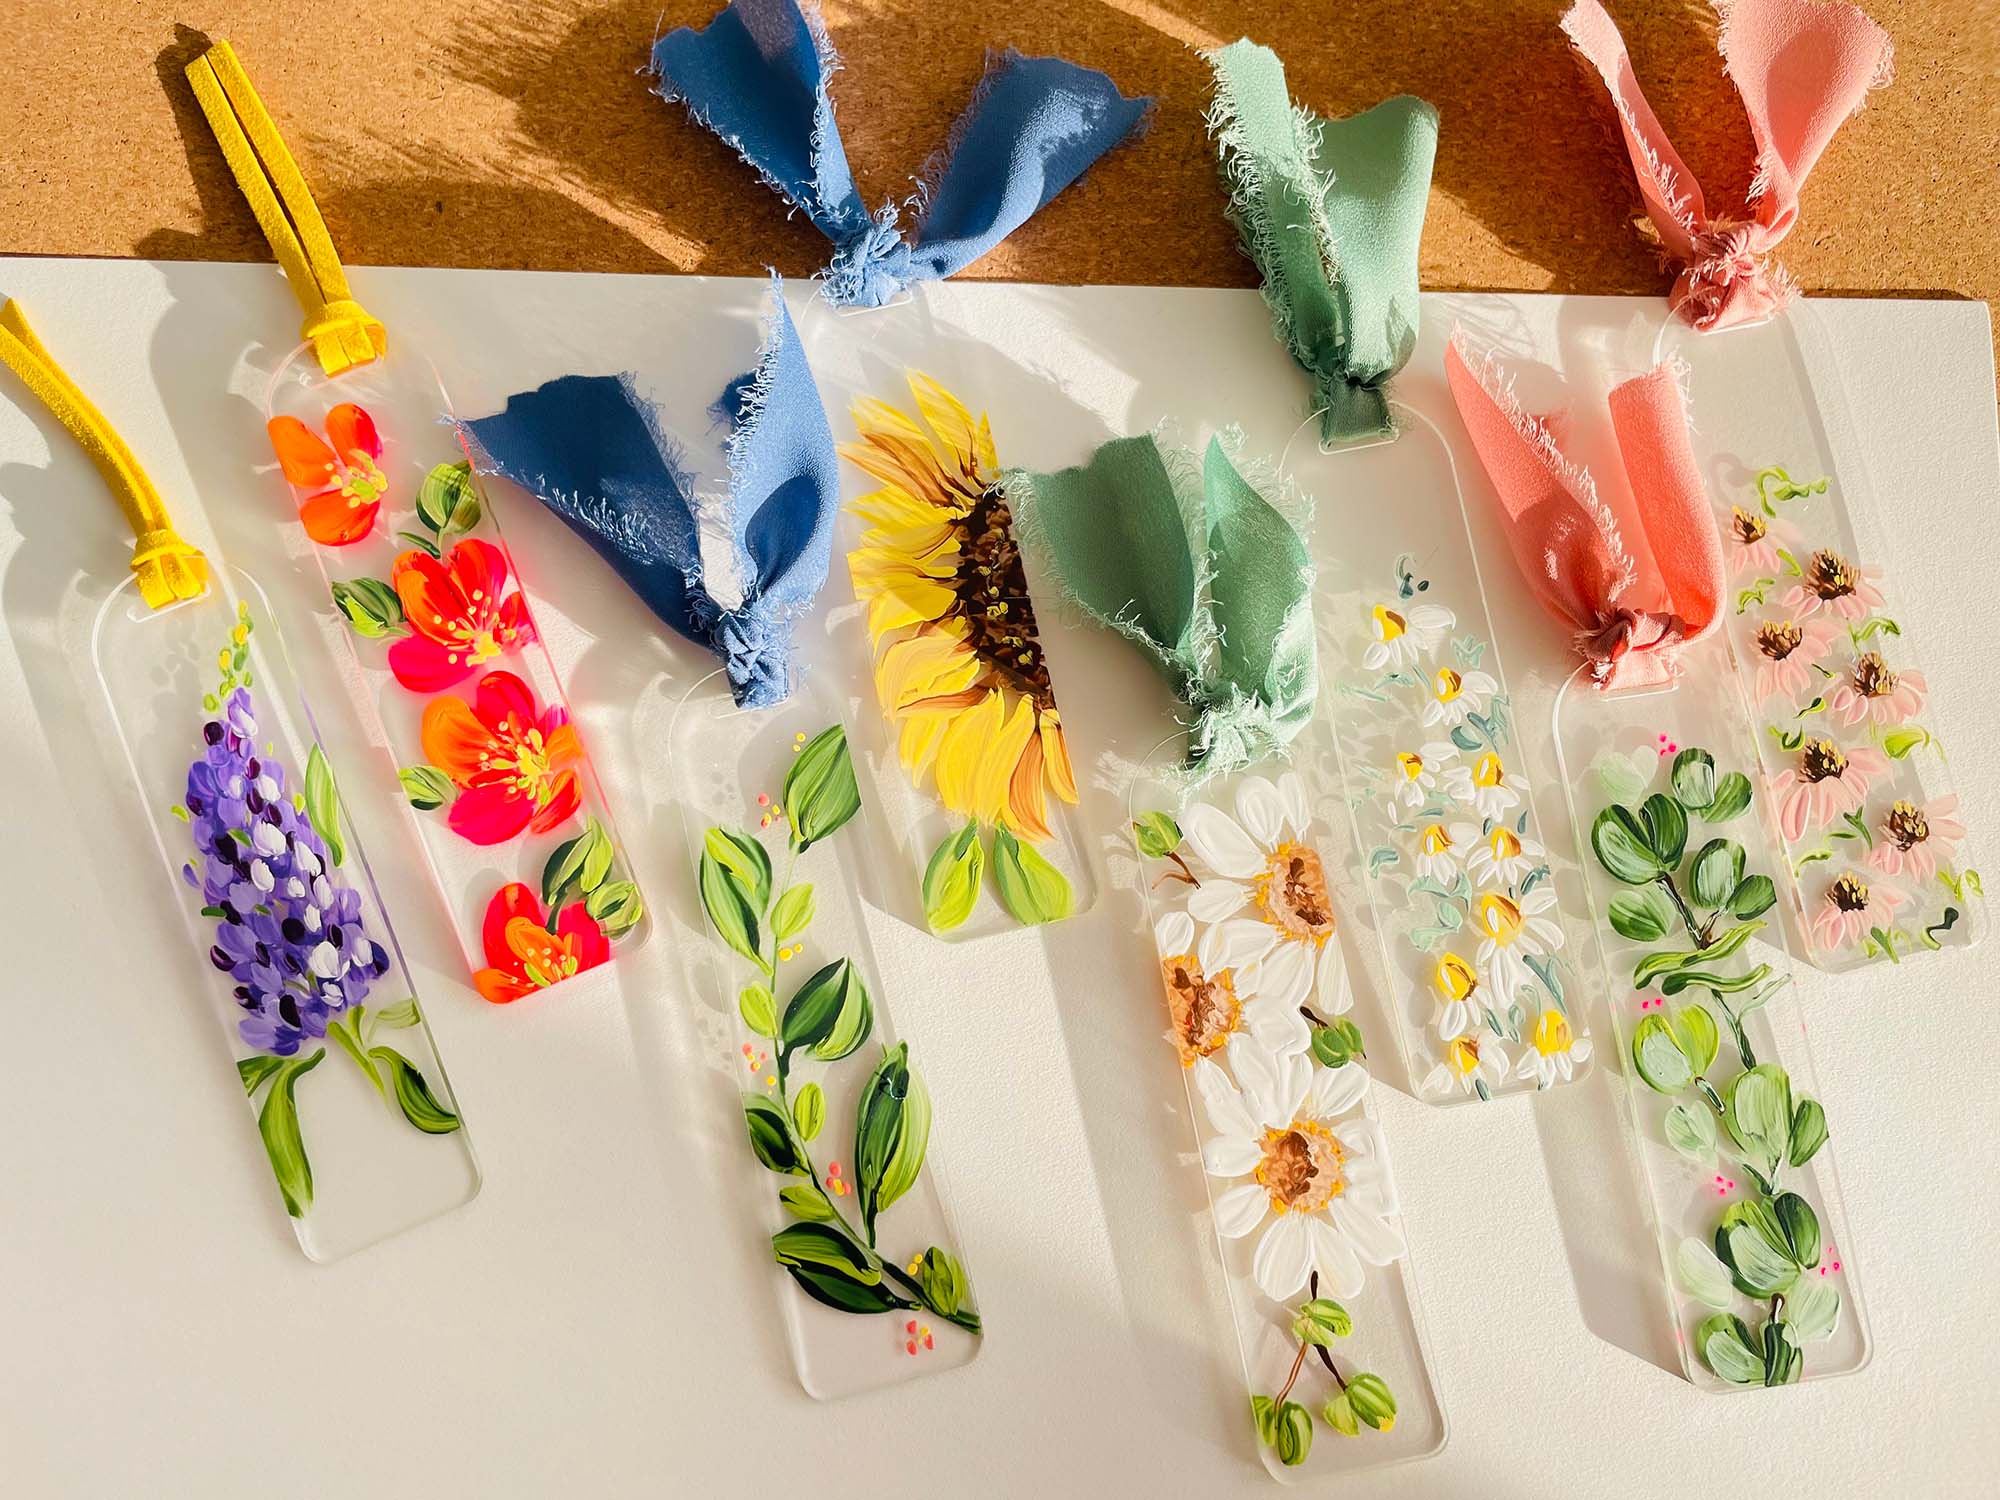 A row of flower-painted acrylic bookmarks on a table in sunlight